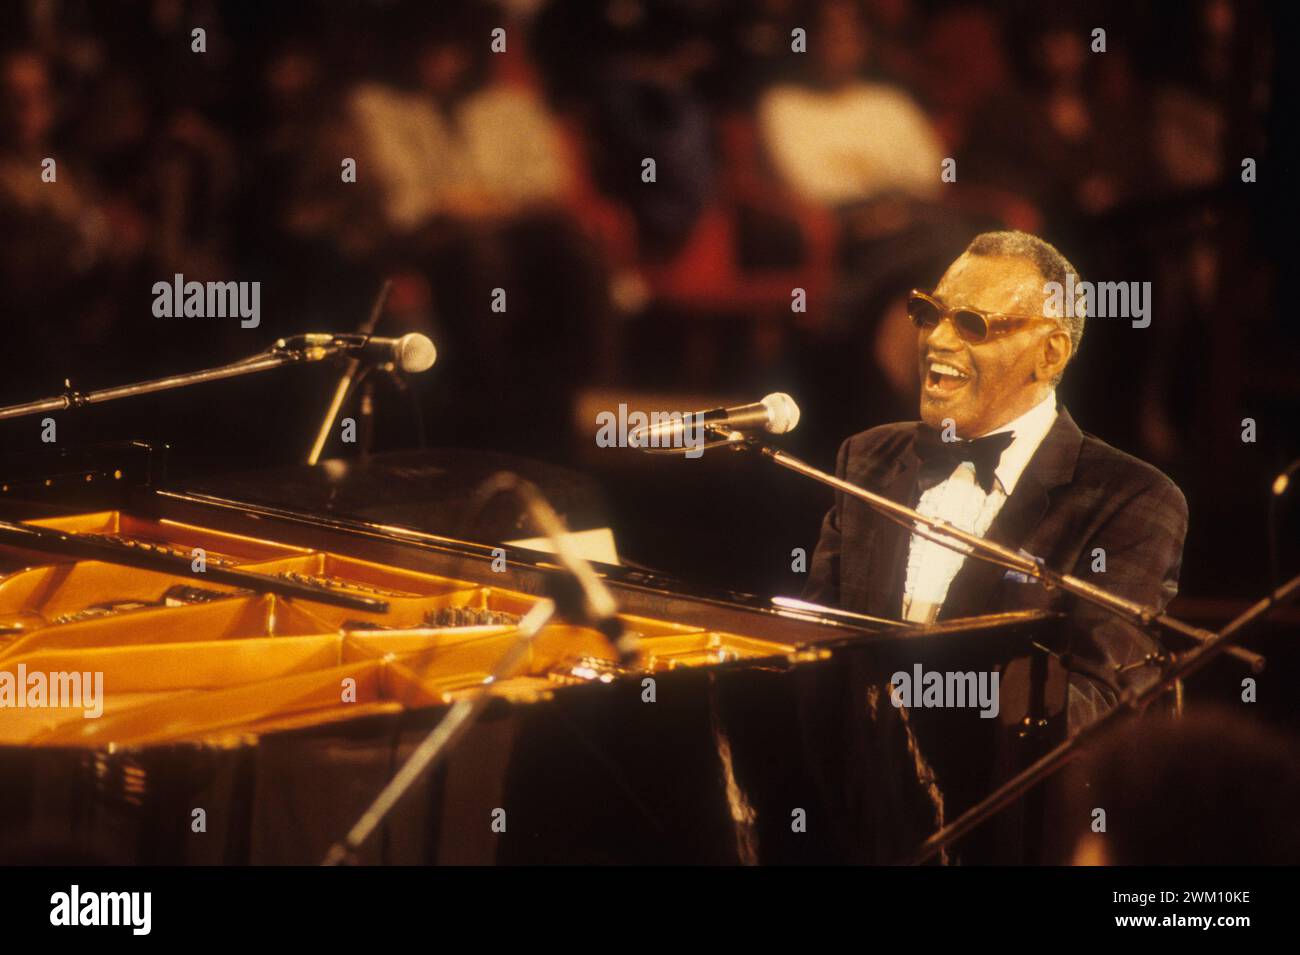 3824395 Festival di Sanremo 1990 Ray Charles; (add.info.: Sanremo Music Festival 1990. American singer-songwriter Ray Charles performing / Festival di Sanremo 1990. Il cantante Ray Charles); © Marcello Mencarini. All rights reserved 2024. Stock Photo